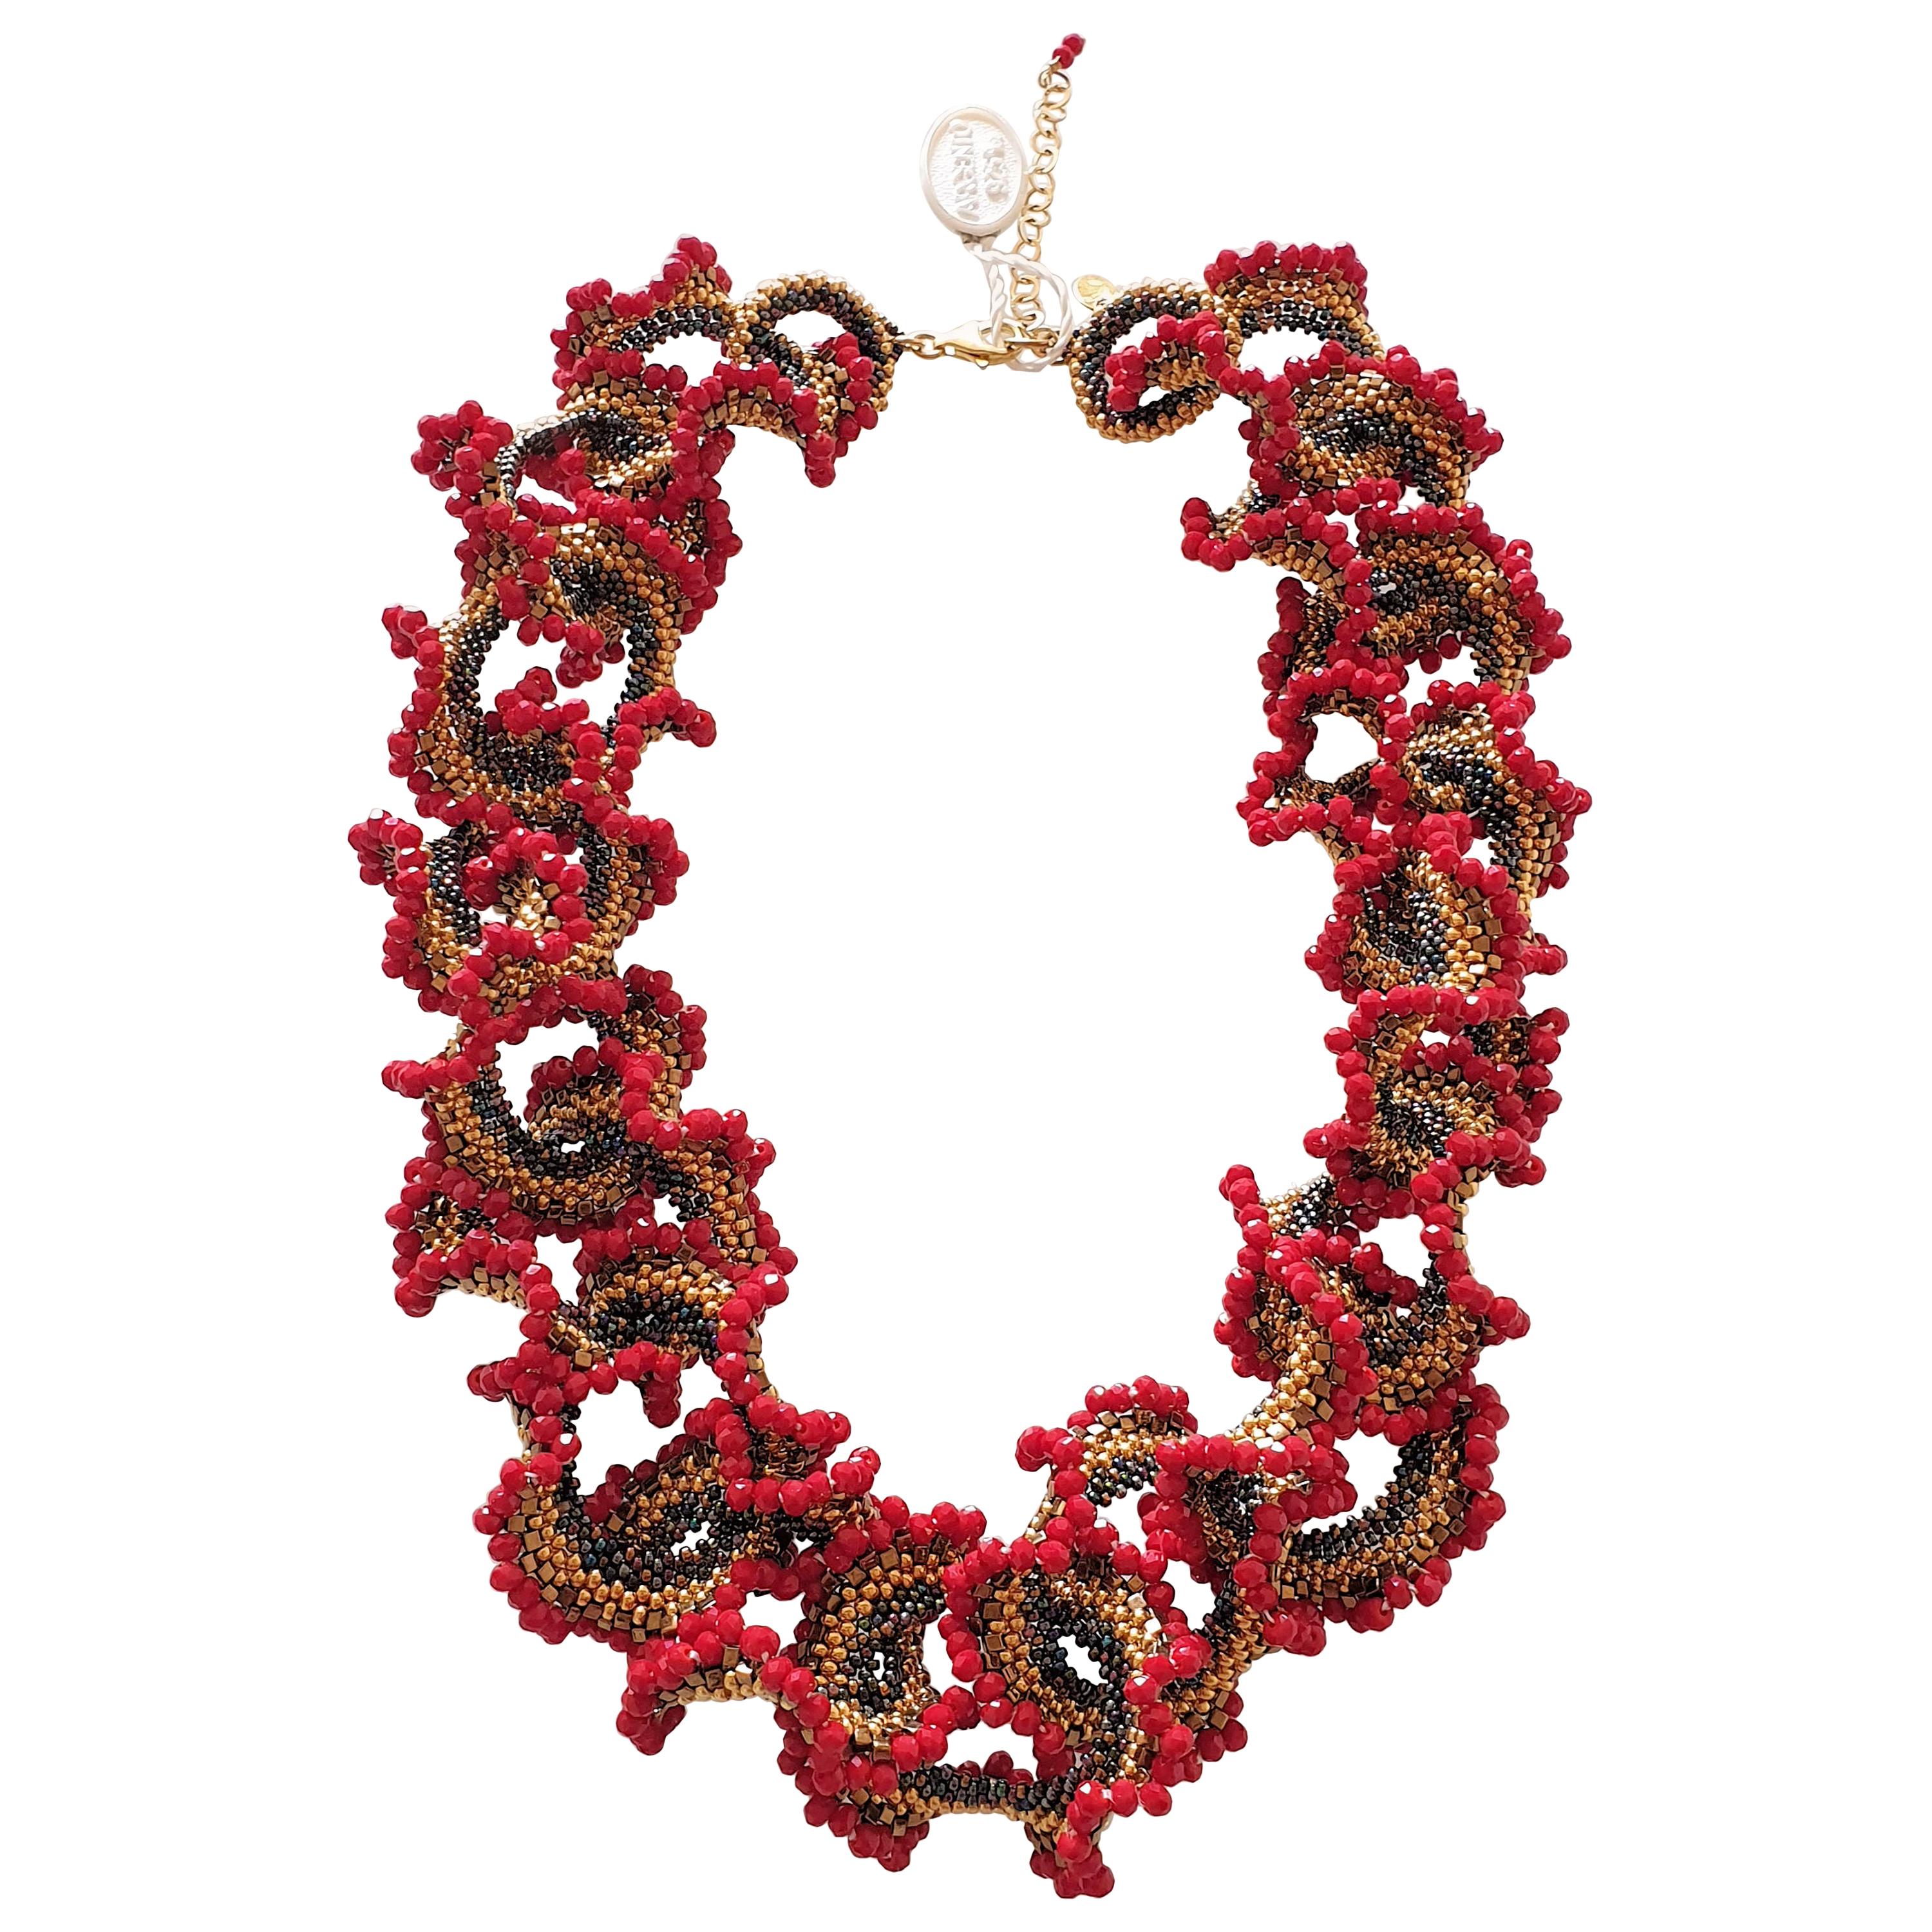 Murano glass beads hand made red & gold fashion neklace by artist Paola B.